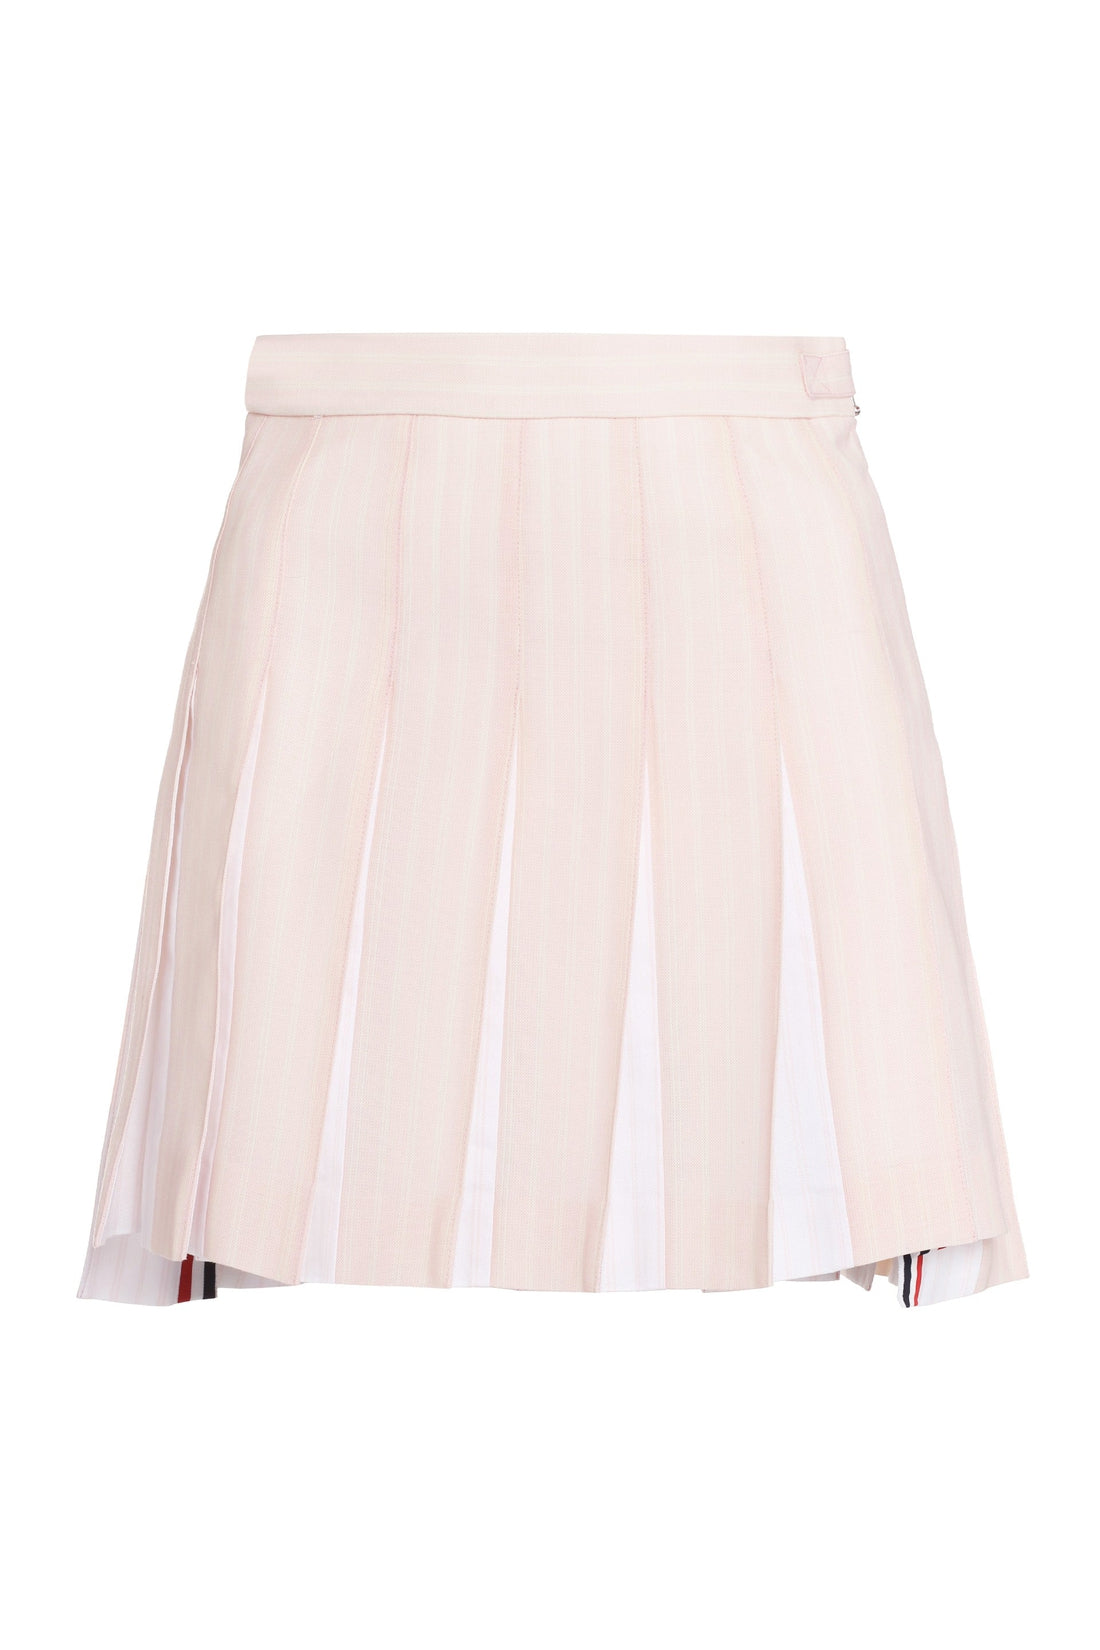 Thom Browne-OUTLET-SALE-Pleated mini skirt-ARCHIVIST